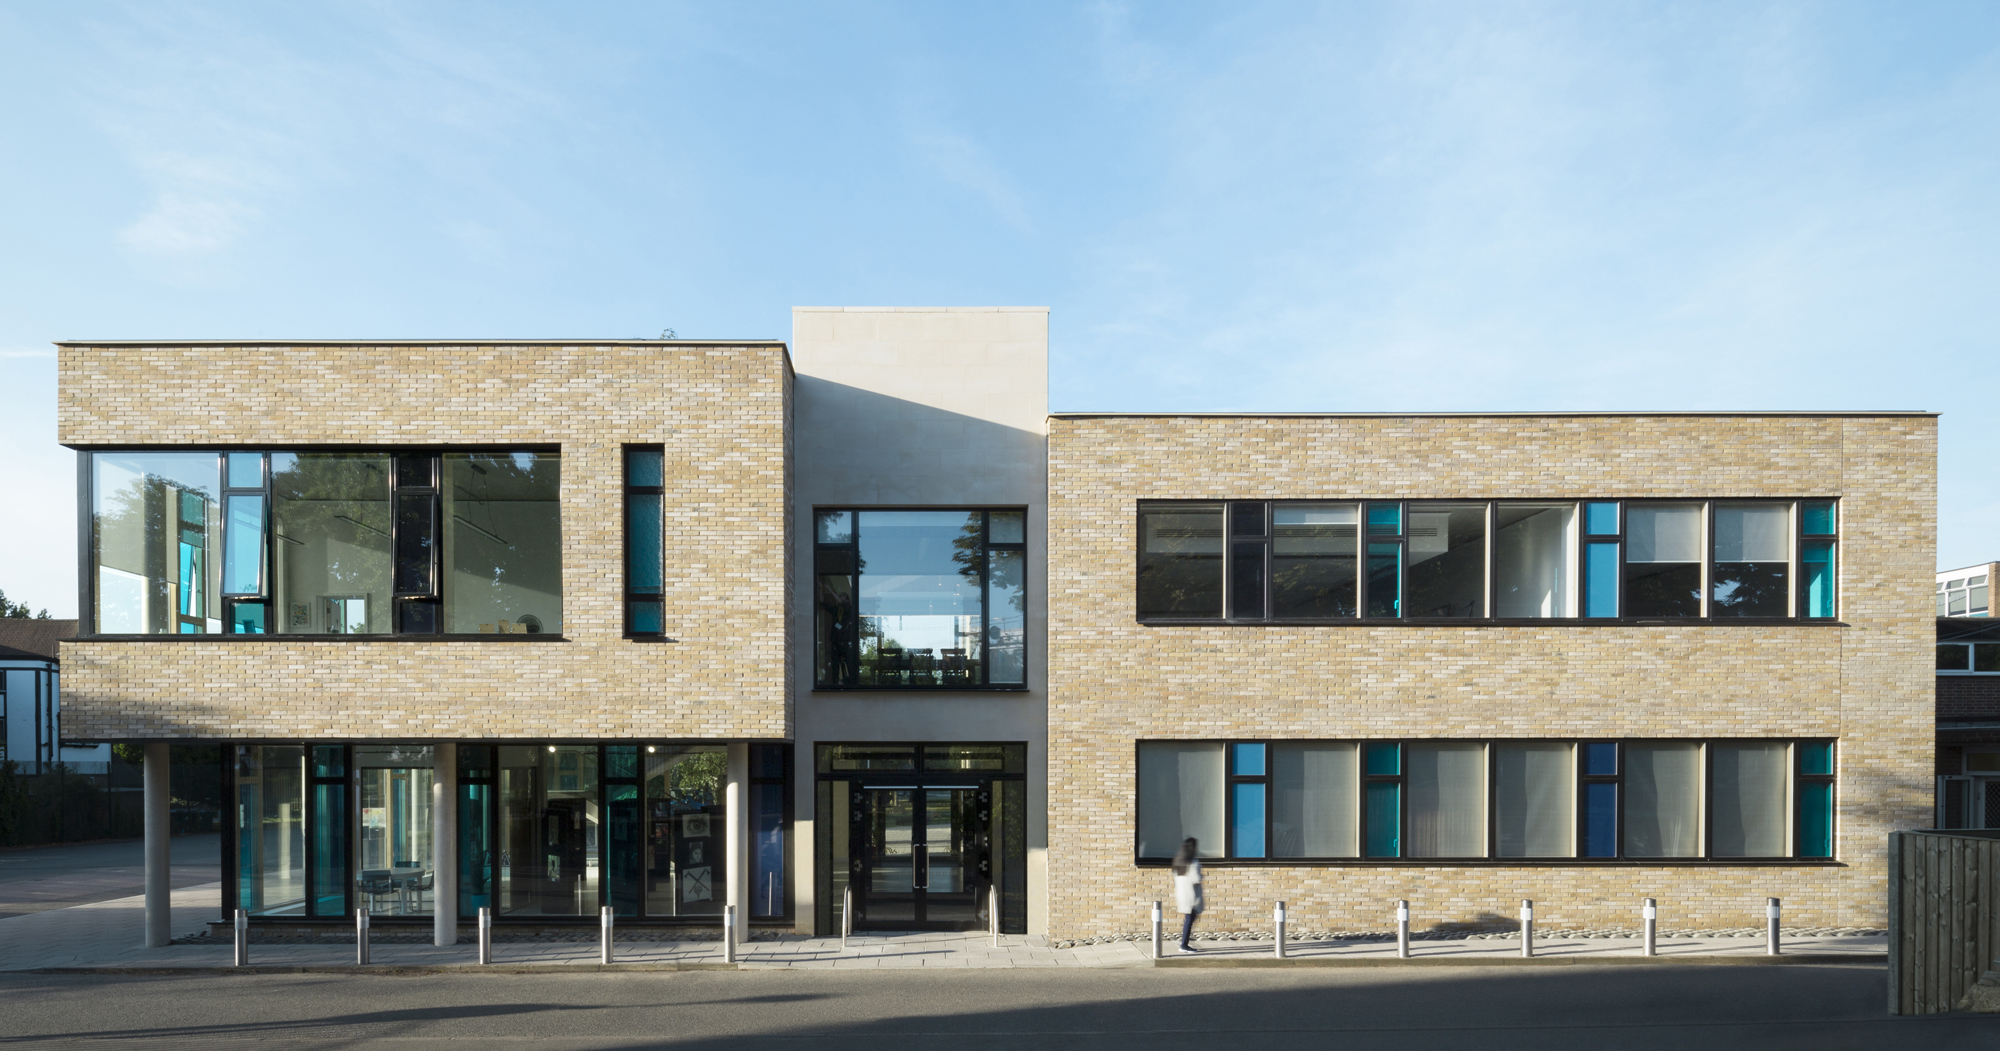 A design-led approach to creating a new school entrance building